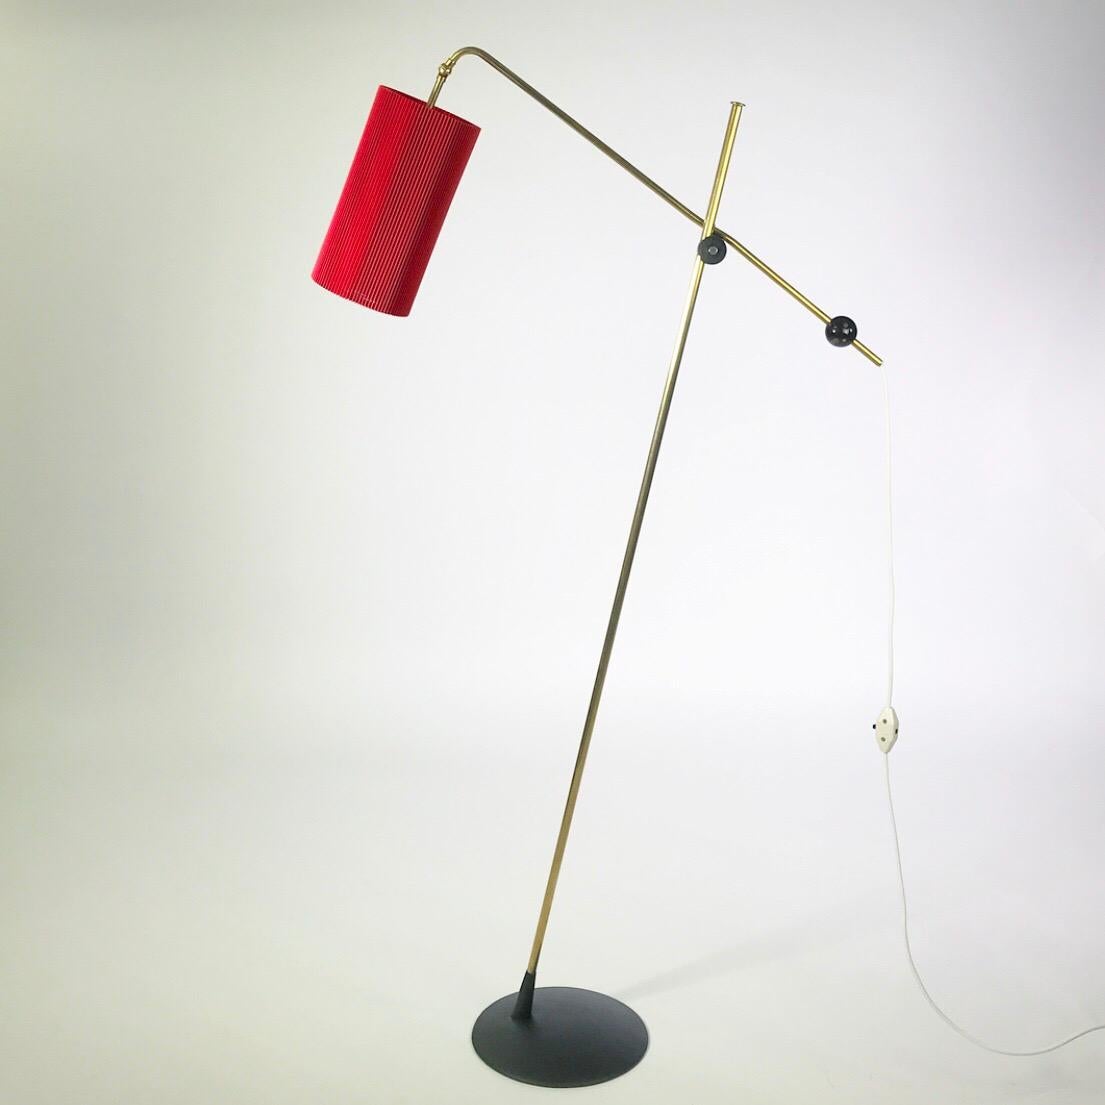 Mid-Century Modern Floor Lamp Made by Arno Leuchten 1950s Berlin, Germany For Sale